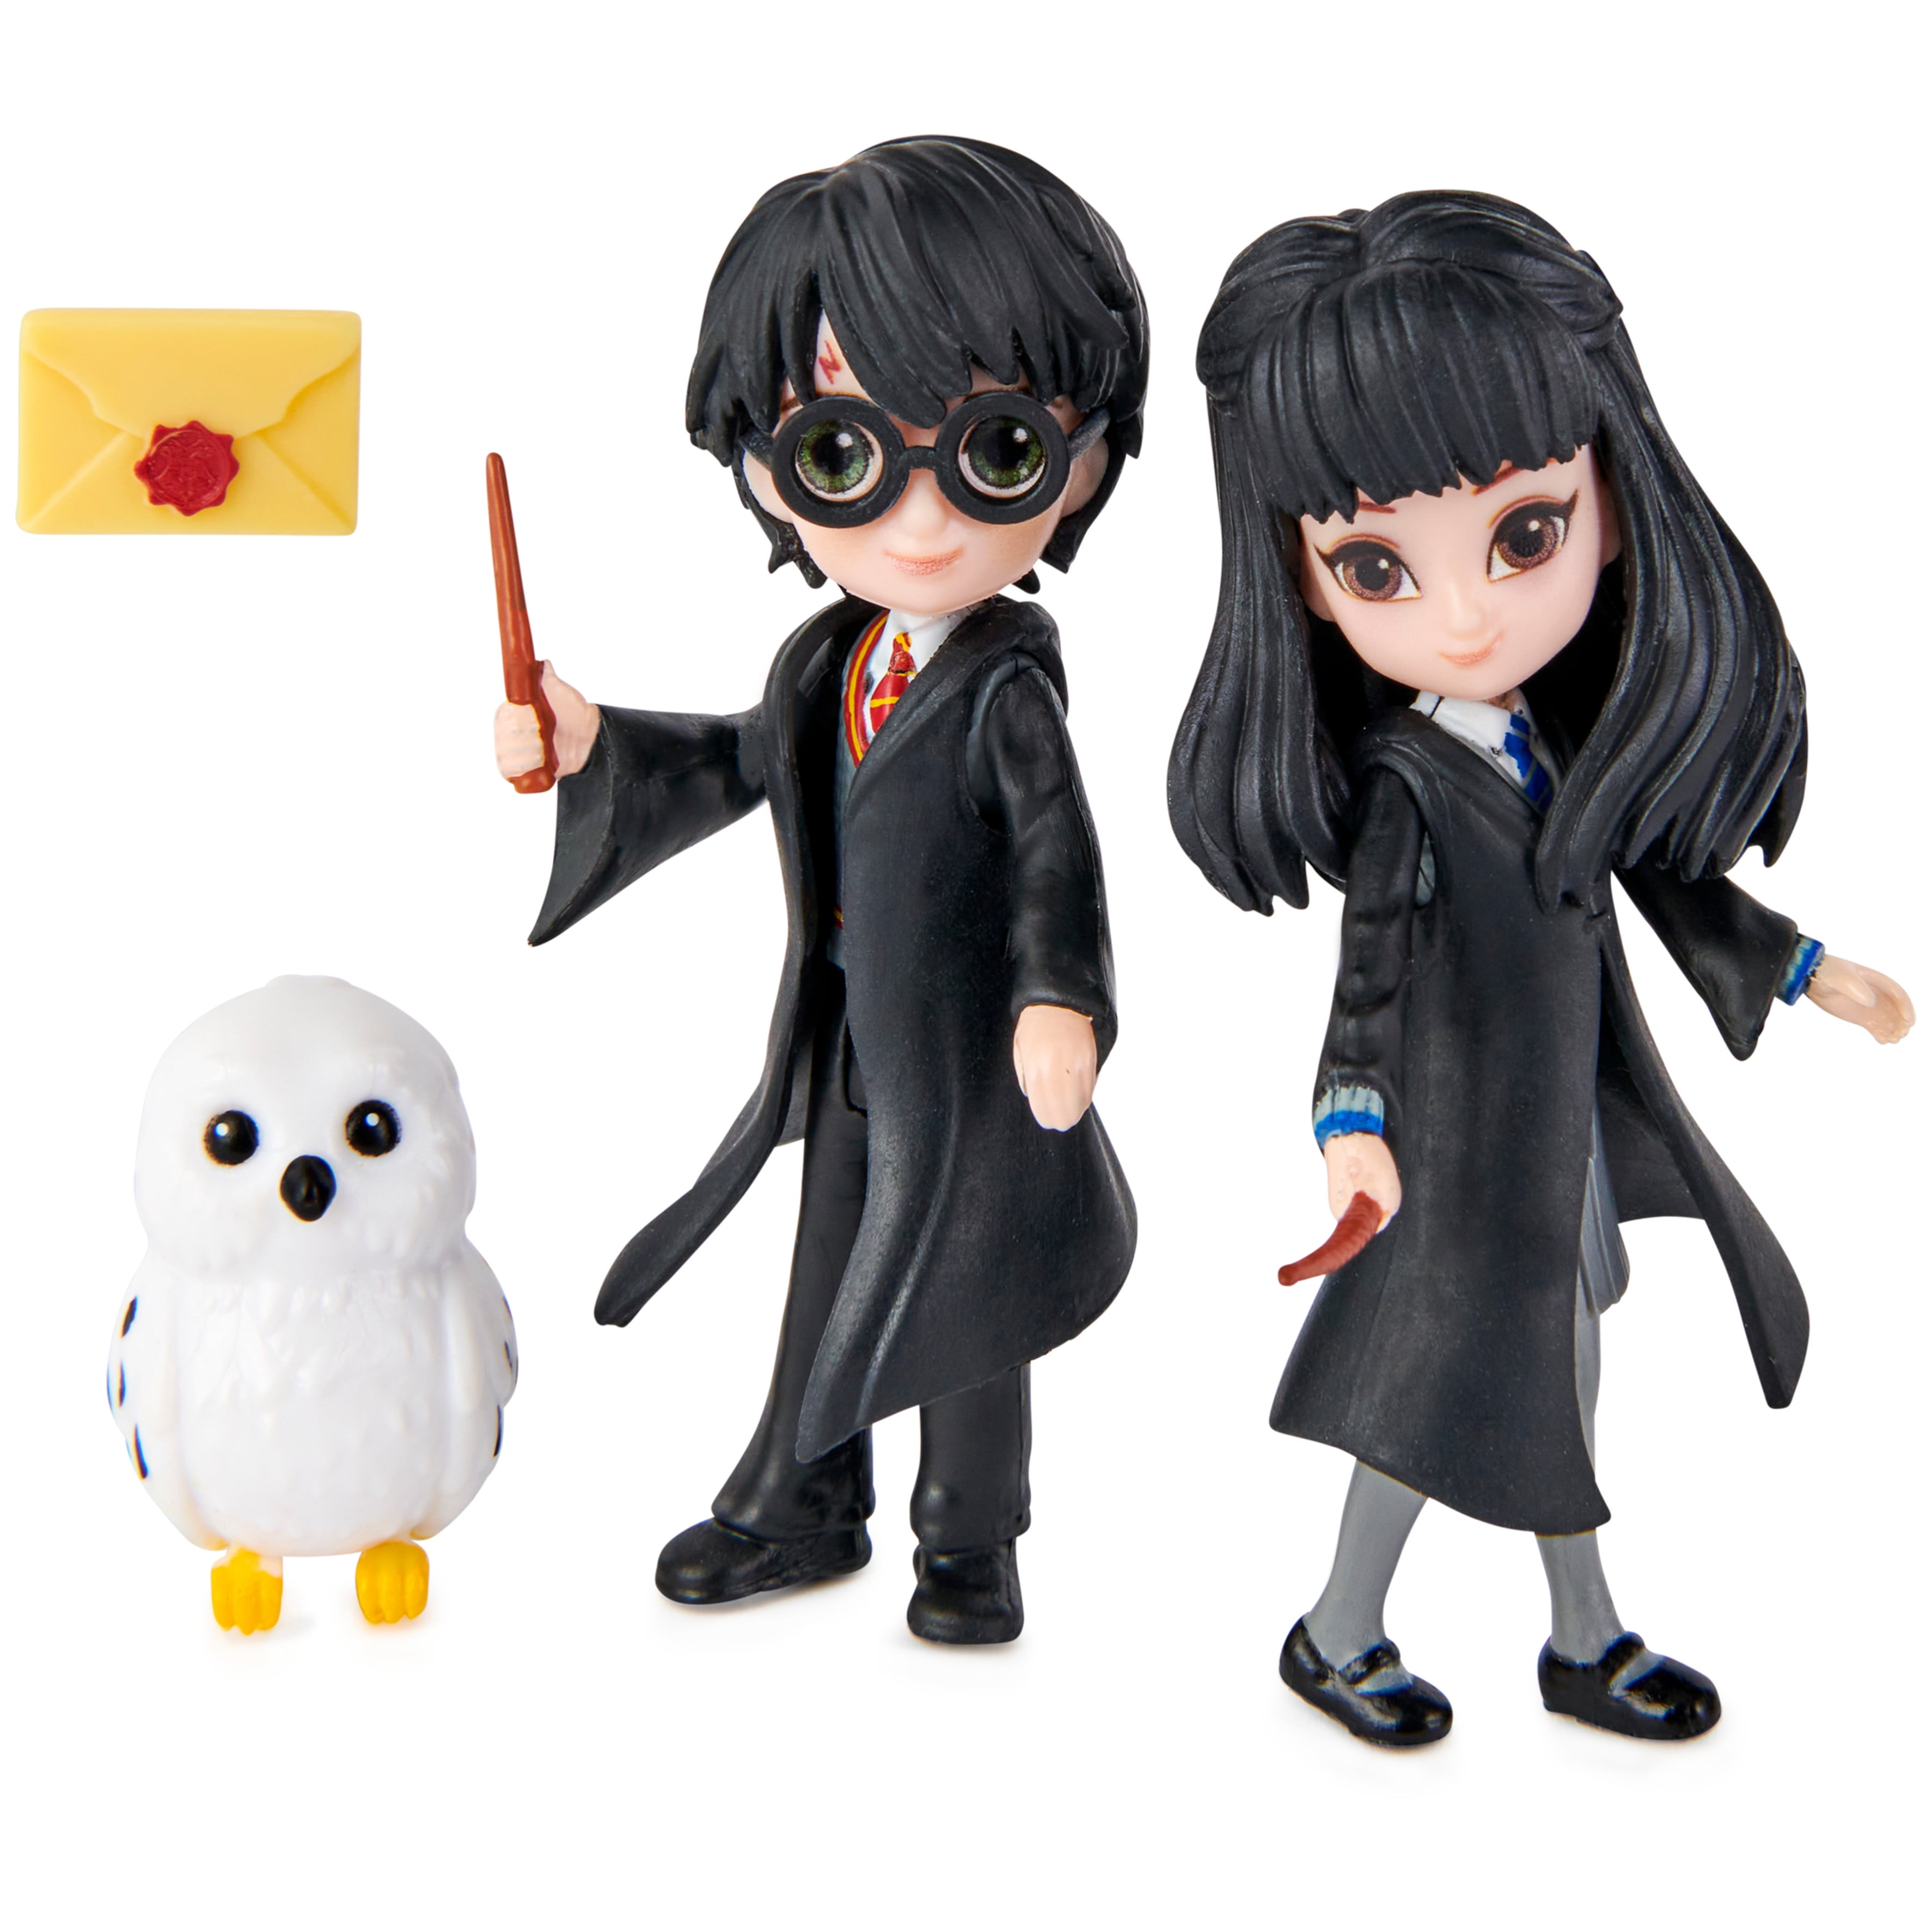 Cute Big eyes harry potter action figure collectible 2022 trend anime doll 